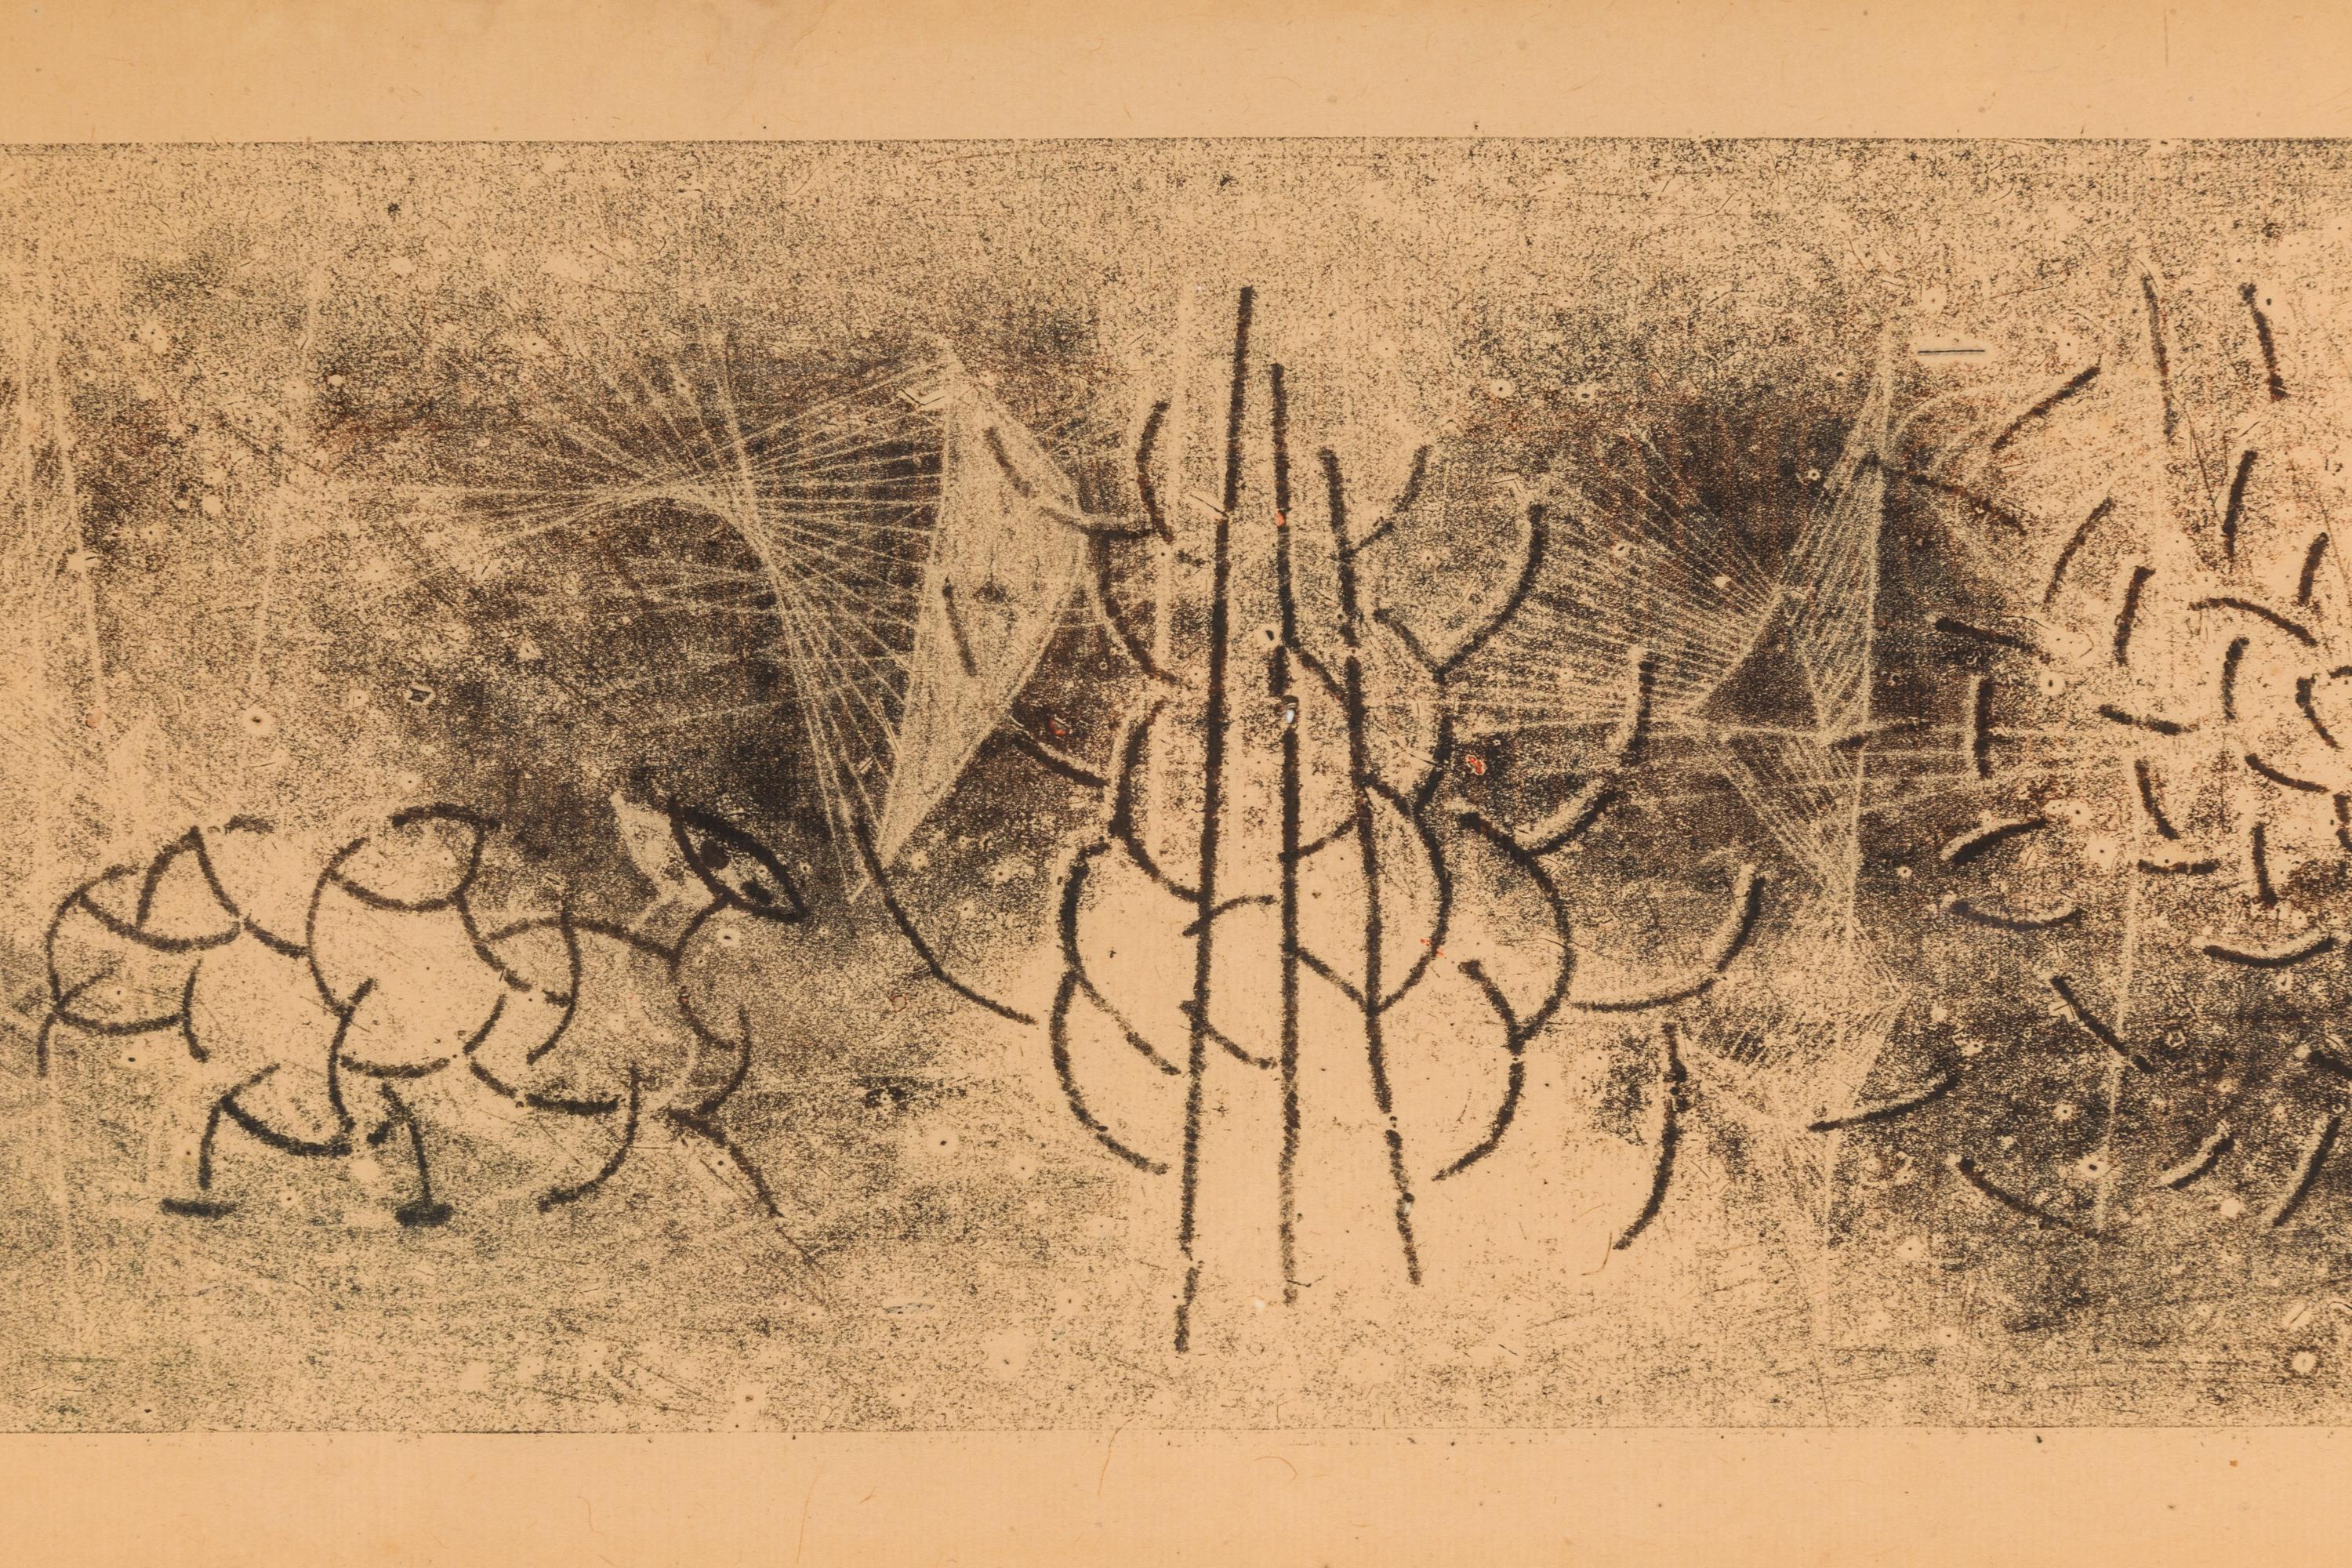 Bertoia created hundreds if not thousands of one of a kind monoprints in his career, often as working drawings for his sculpture works. He employed a variety of techniques to arrive at his unique ends, most often scribing the reverse of a paper on